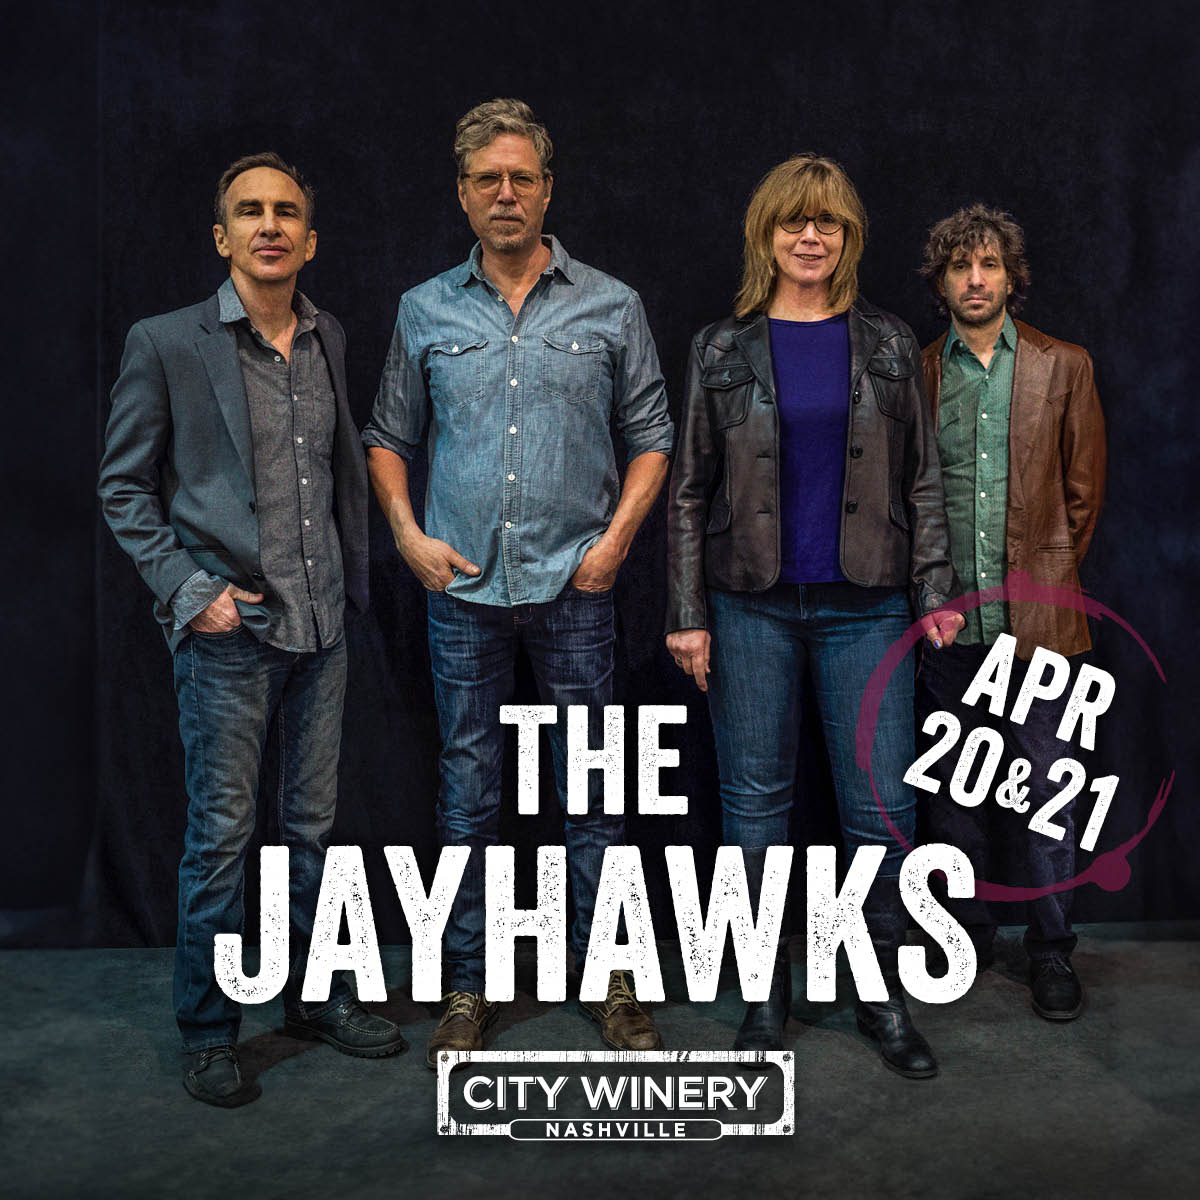 Thanks to everyone who came out to the sold out show last night at @CityWineryNSH! We're back again tonight, with the addition of Stephen McCarthy to the lineup for some extra spice & excitement. Still a few tickets remaining: bit.ly/3tMrz7Q bit.ly/JayhawksShows